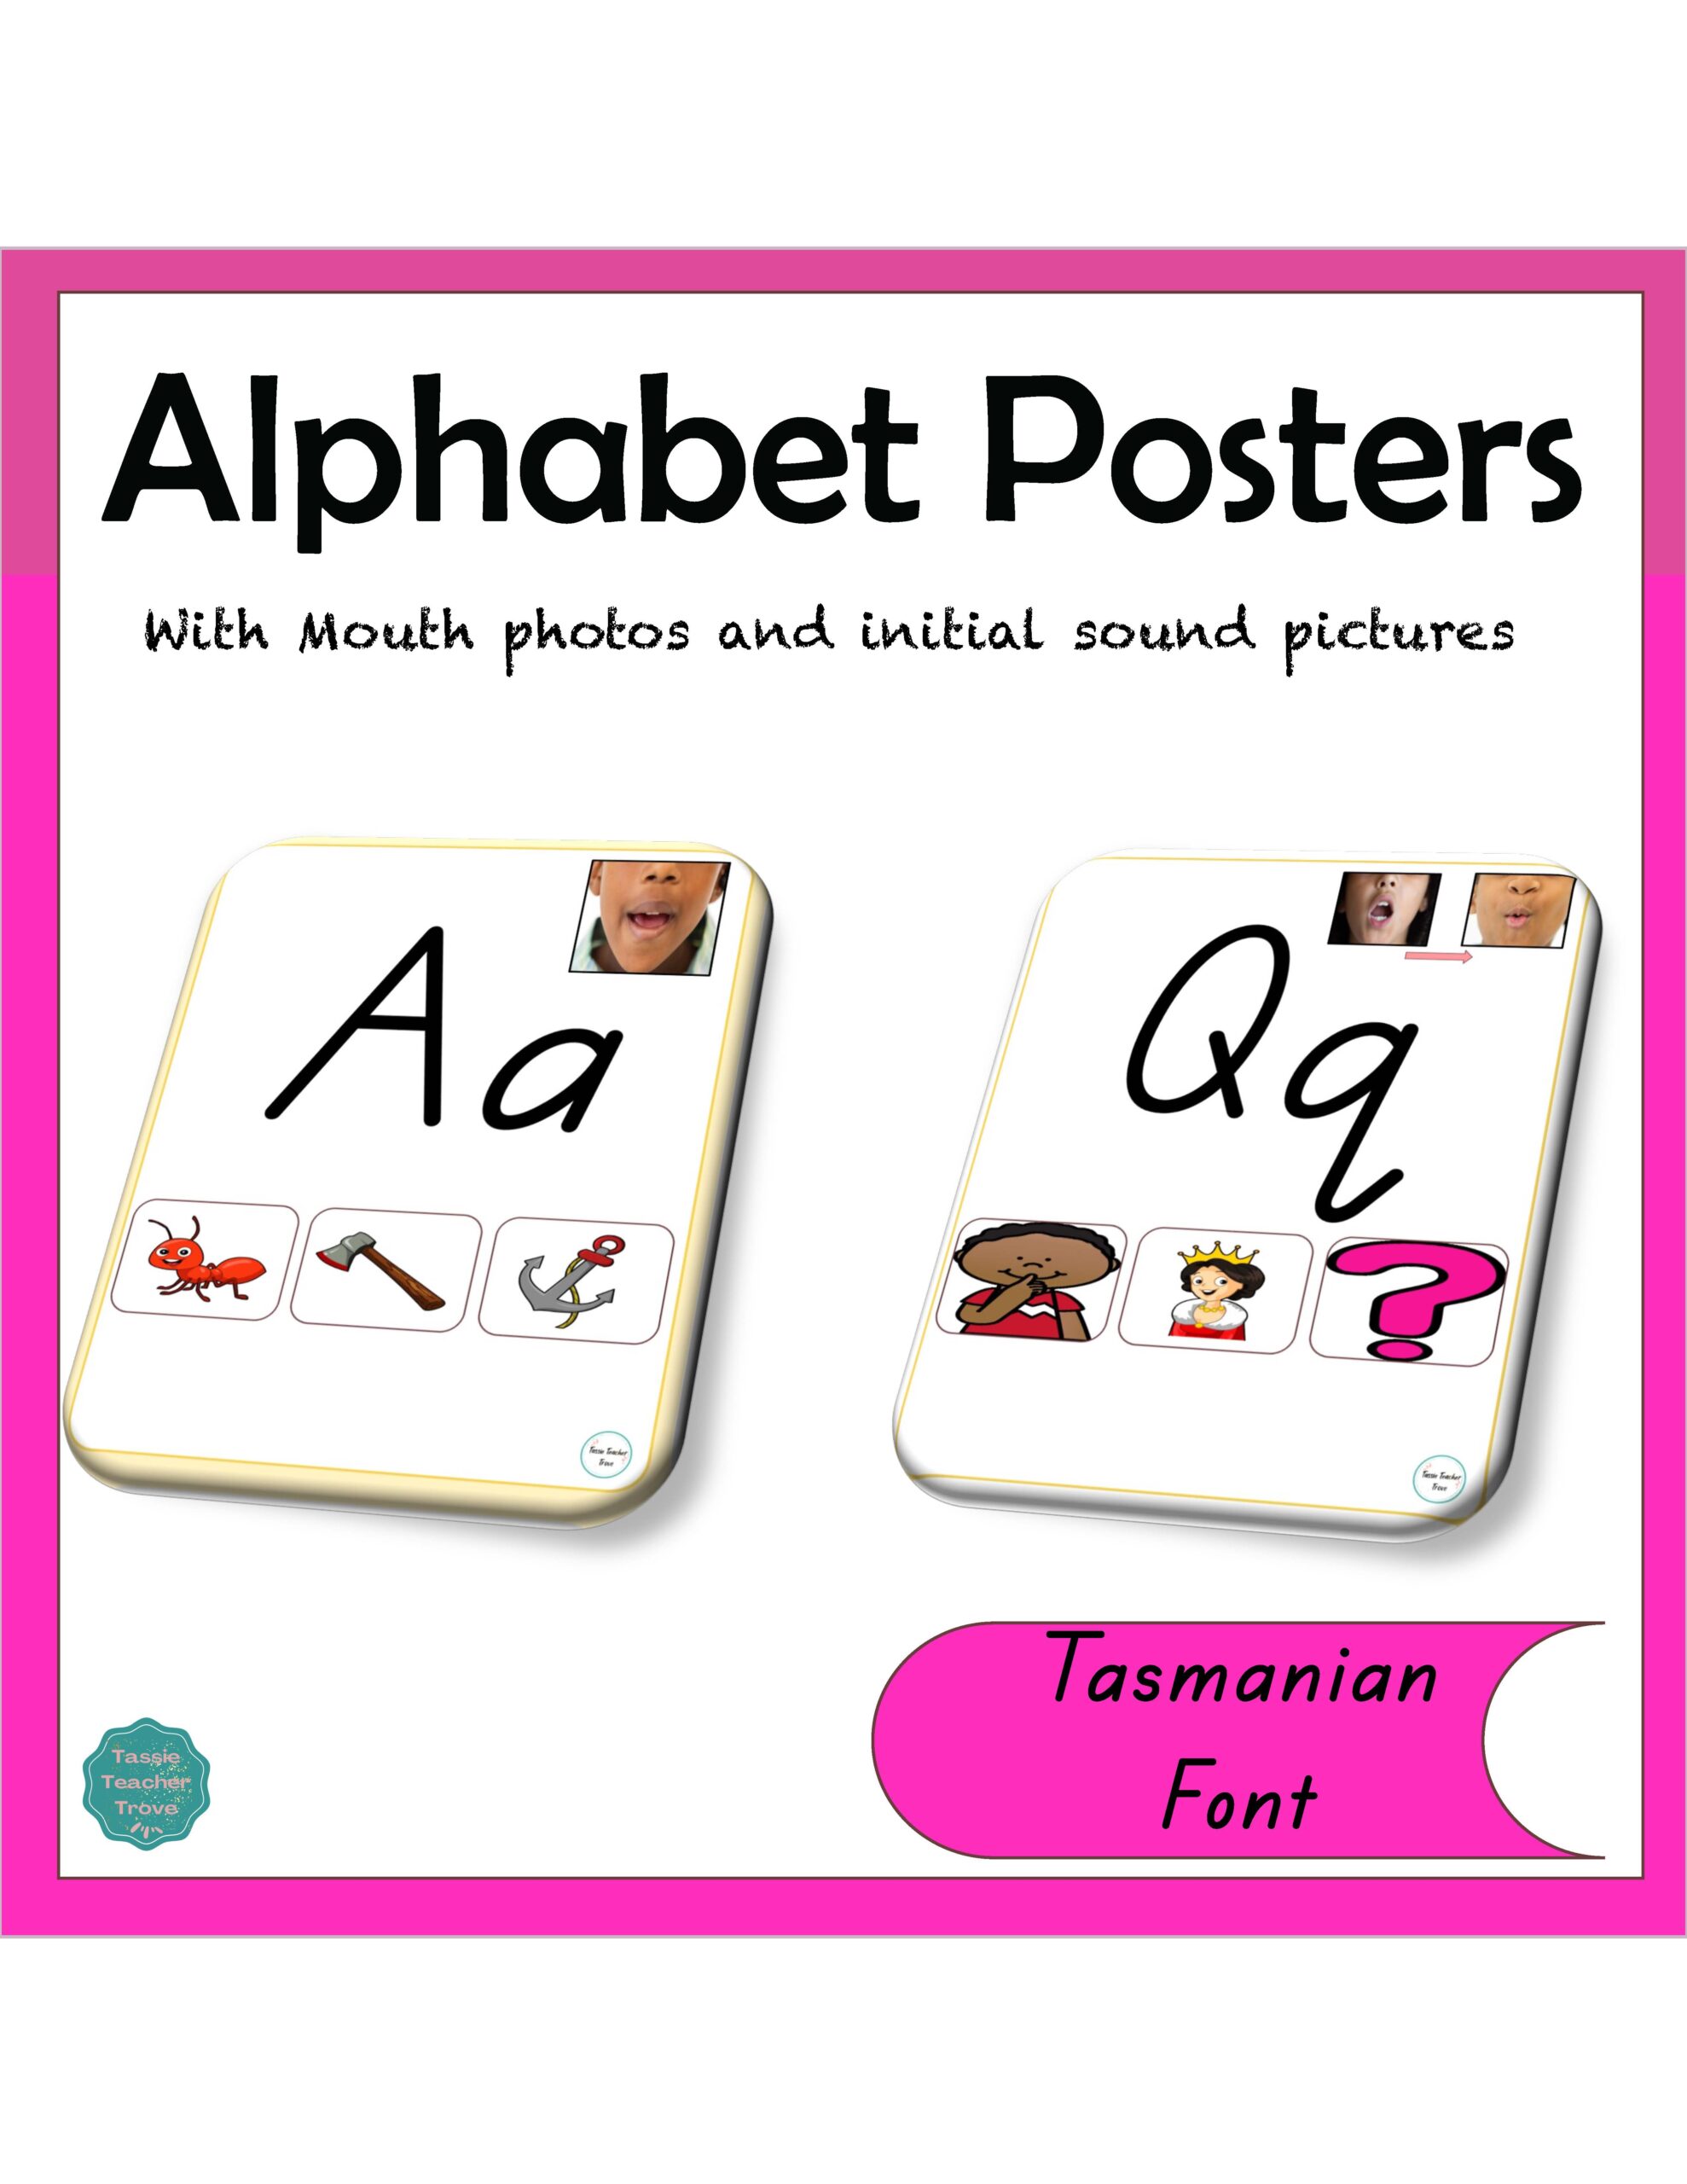 Alphabet Posters With Mouth Photos And Pictures Page 01